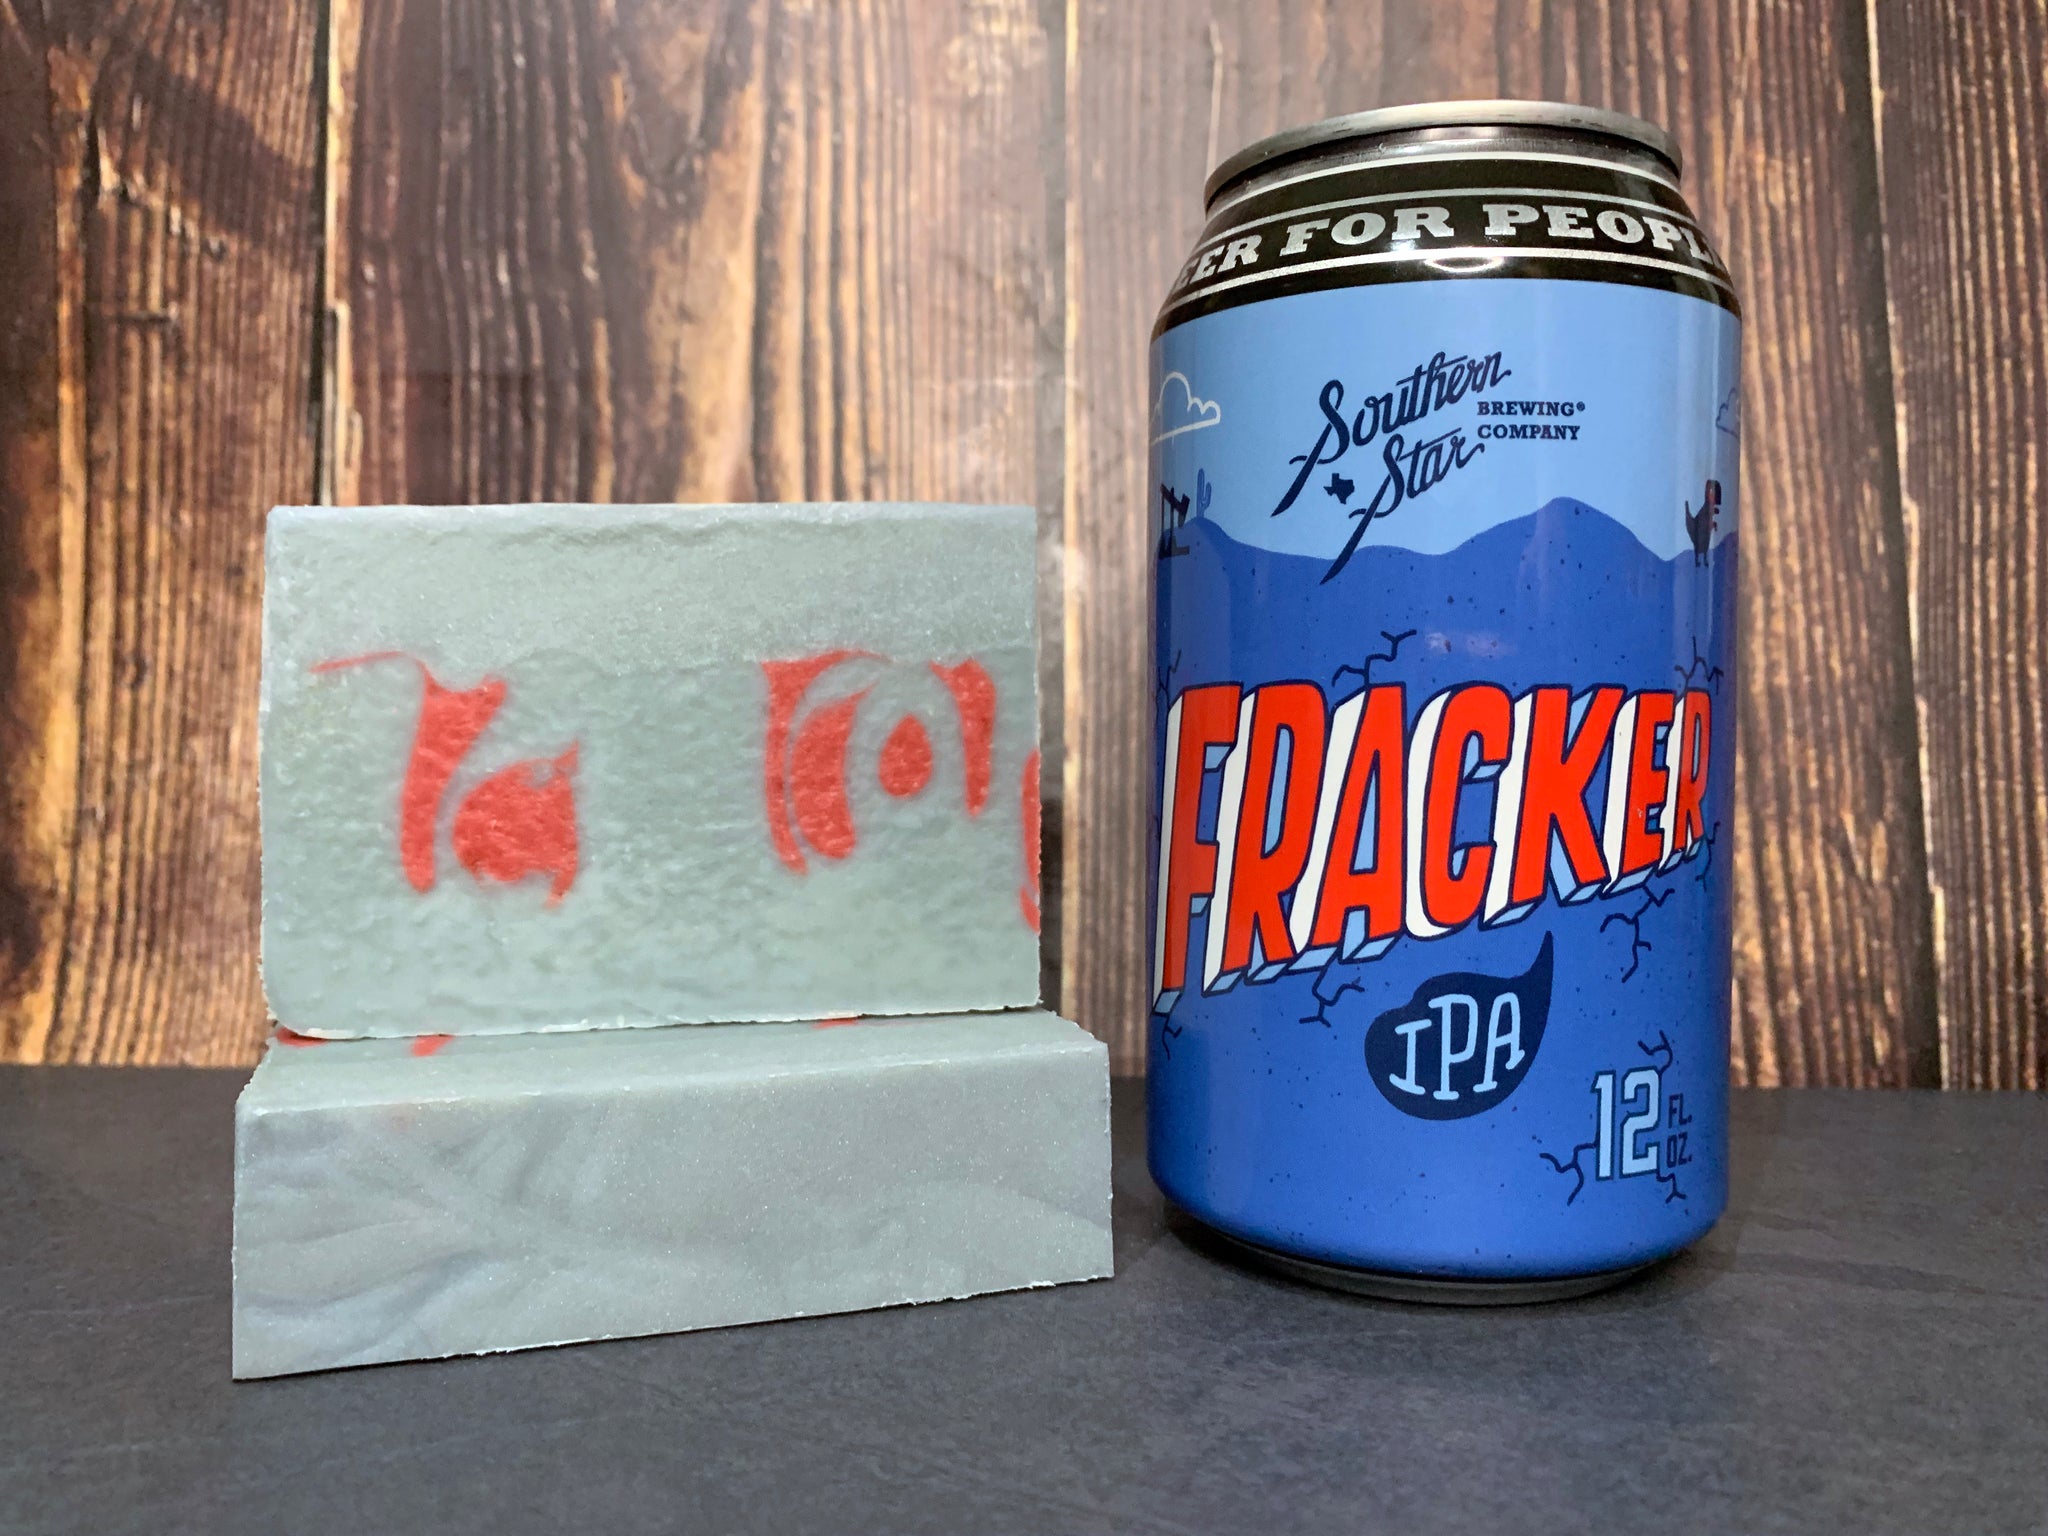 red and blue beer soap fracker ipa southern star brewing company texas beer soap by spunkndisorderly craft beer soaps spunkndisorderly.com